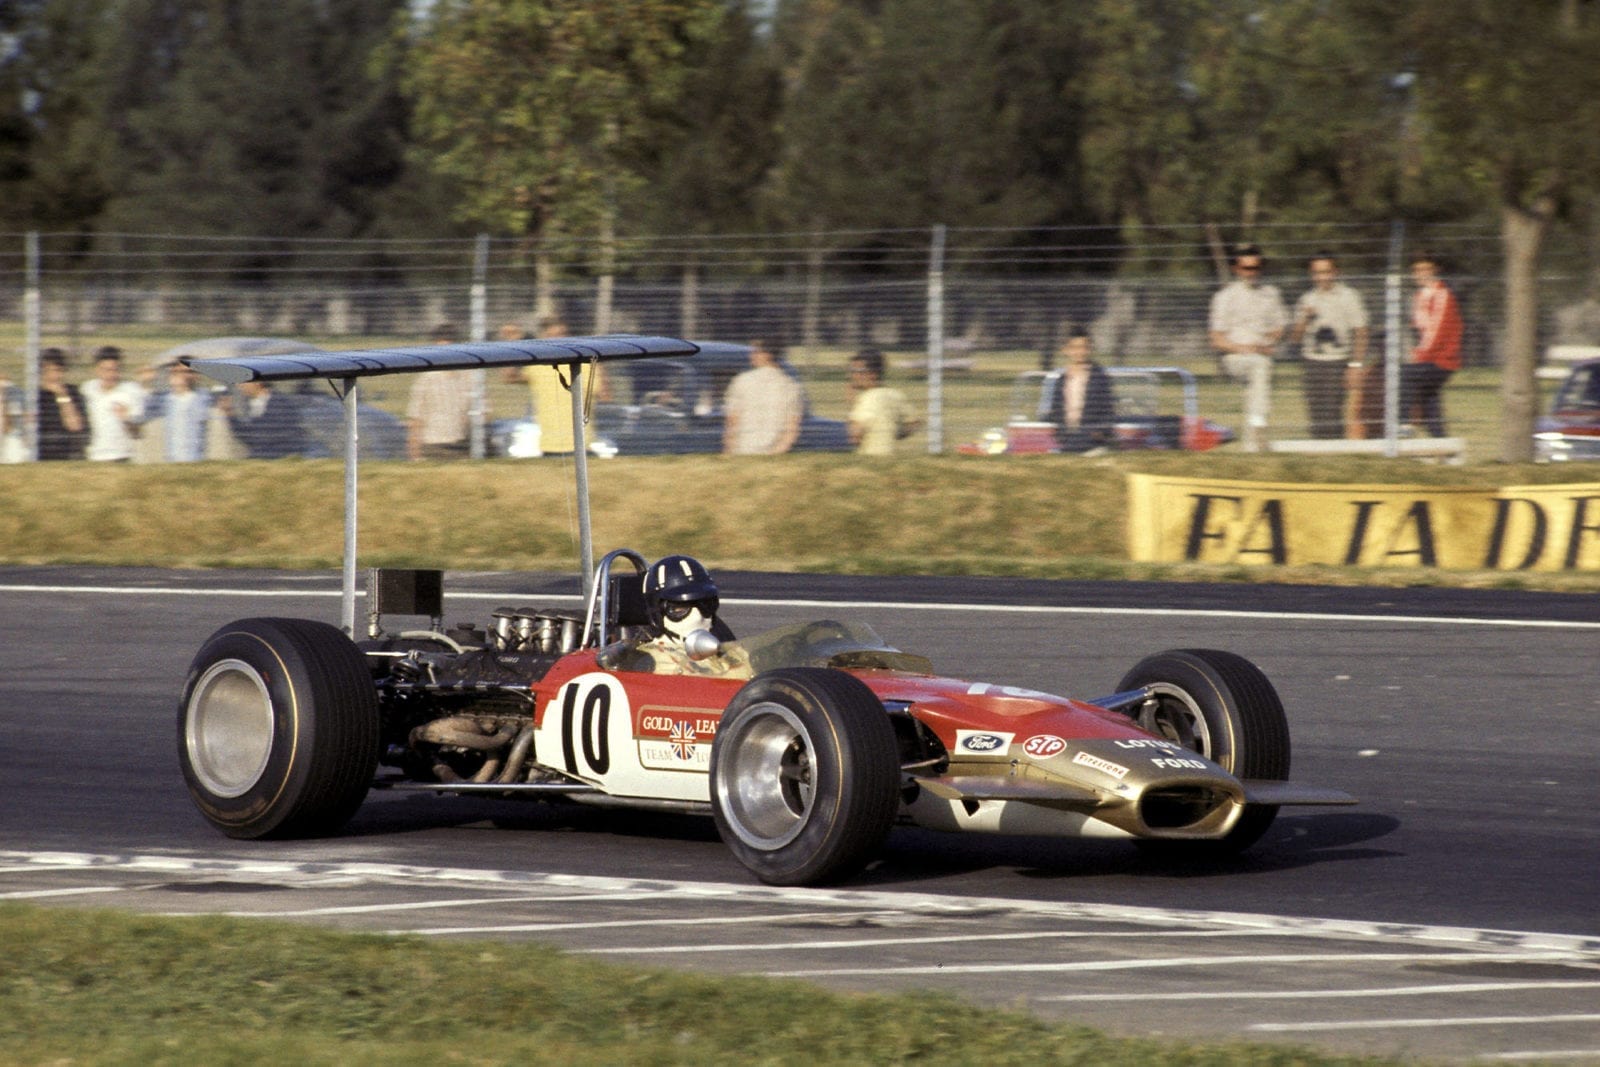 Lotus driver Graham Hill on his way to victory at the 1968 Mexican Grand Prix